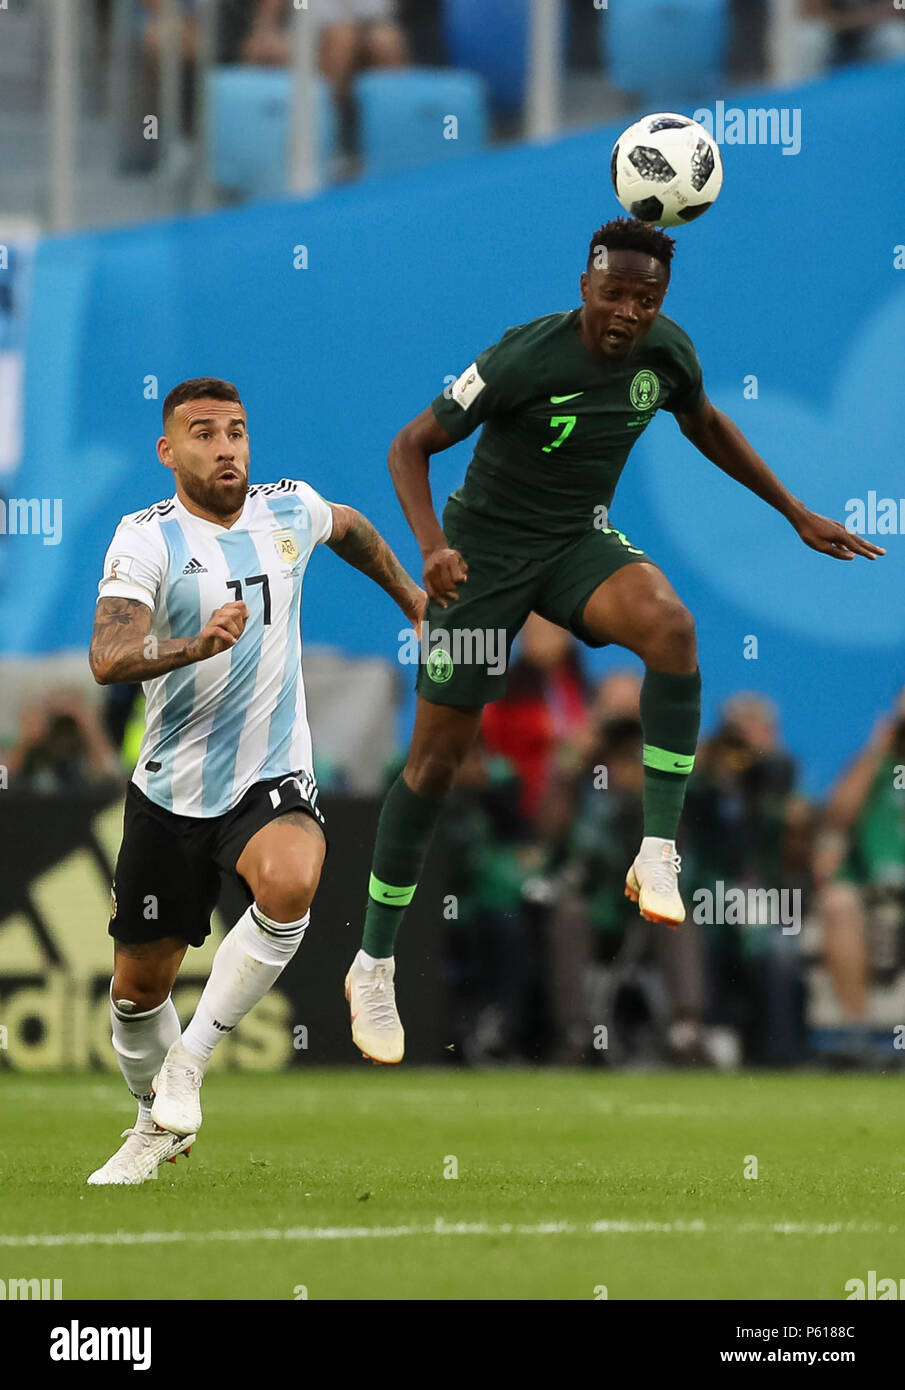 St Petersburg, Russia. 26th Jun, 2018. Nicolas Otamendi of Argentina and Ahmed Musa of Nigeria during the 2018 FIFA World Cup Group D match between Nigeria and Argentina at Saint Petersburg Stadium on June 26th 2018 in Saint Petersburg, Russia. (Photo by Daniel Chesterton/phcimages.com) Credit: PHC Images/Alamy Live News Stock Photo